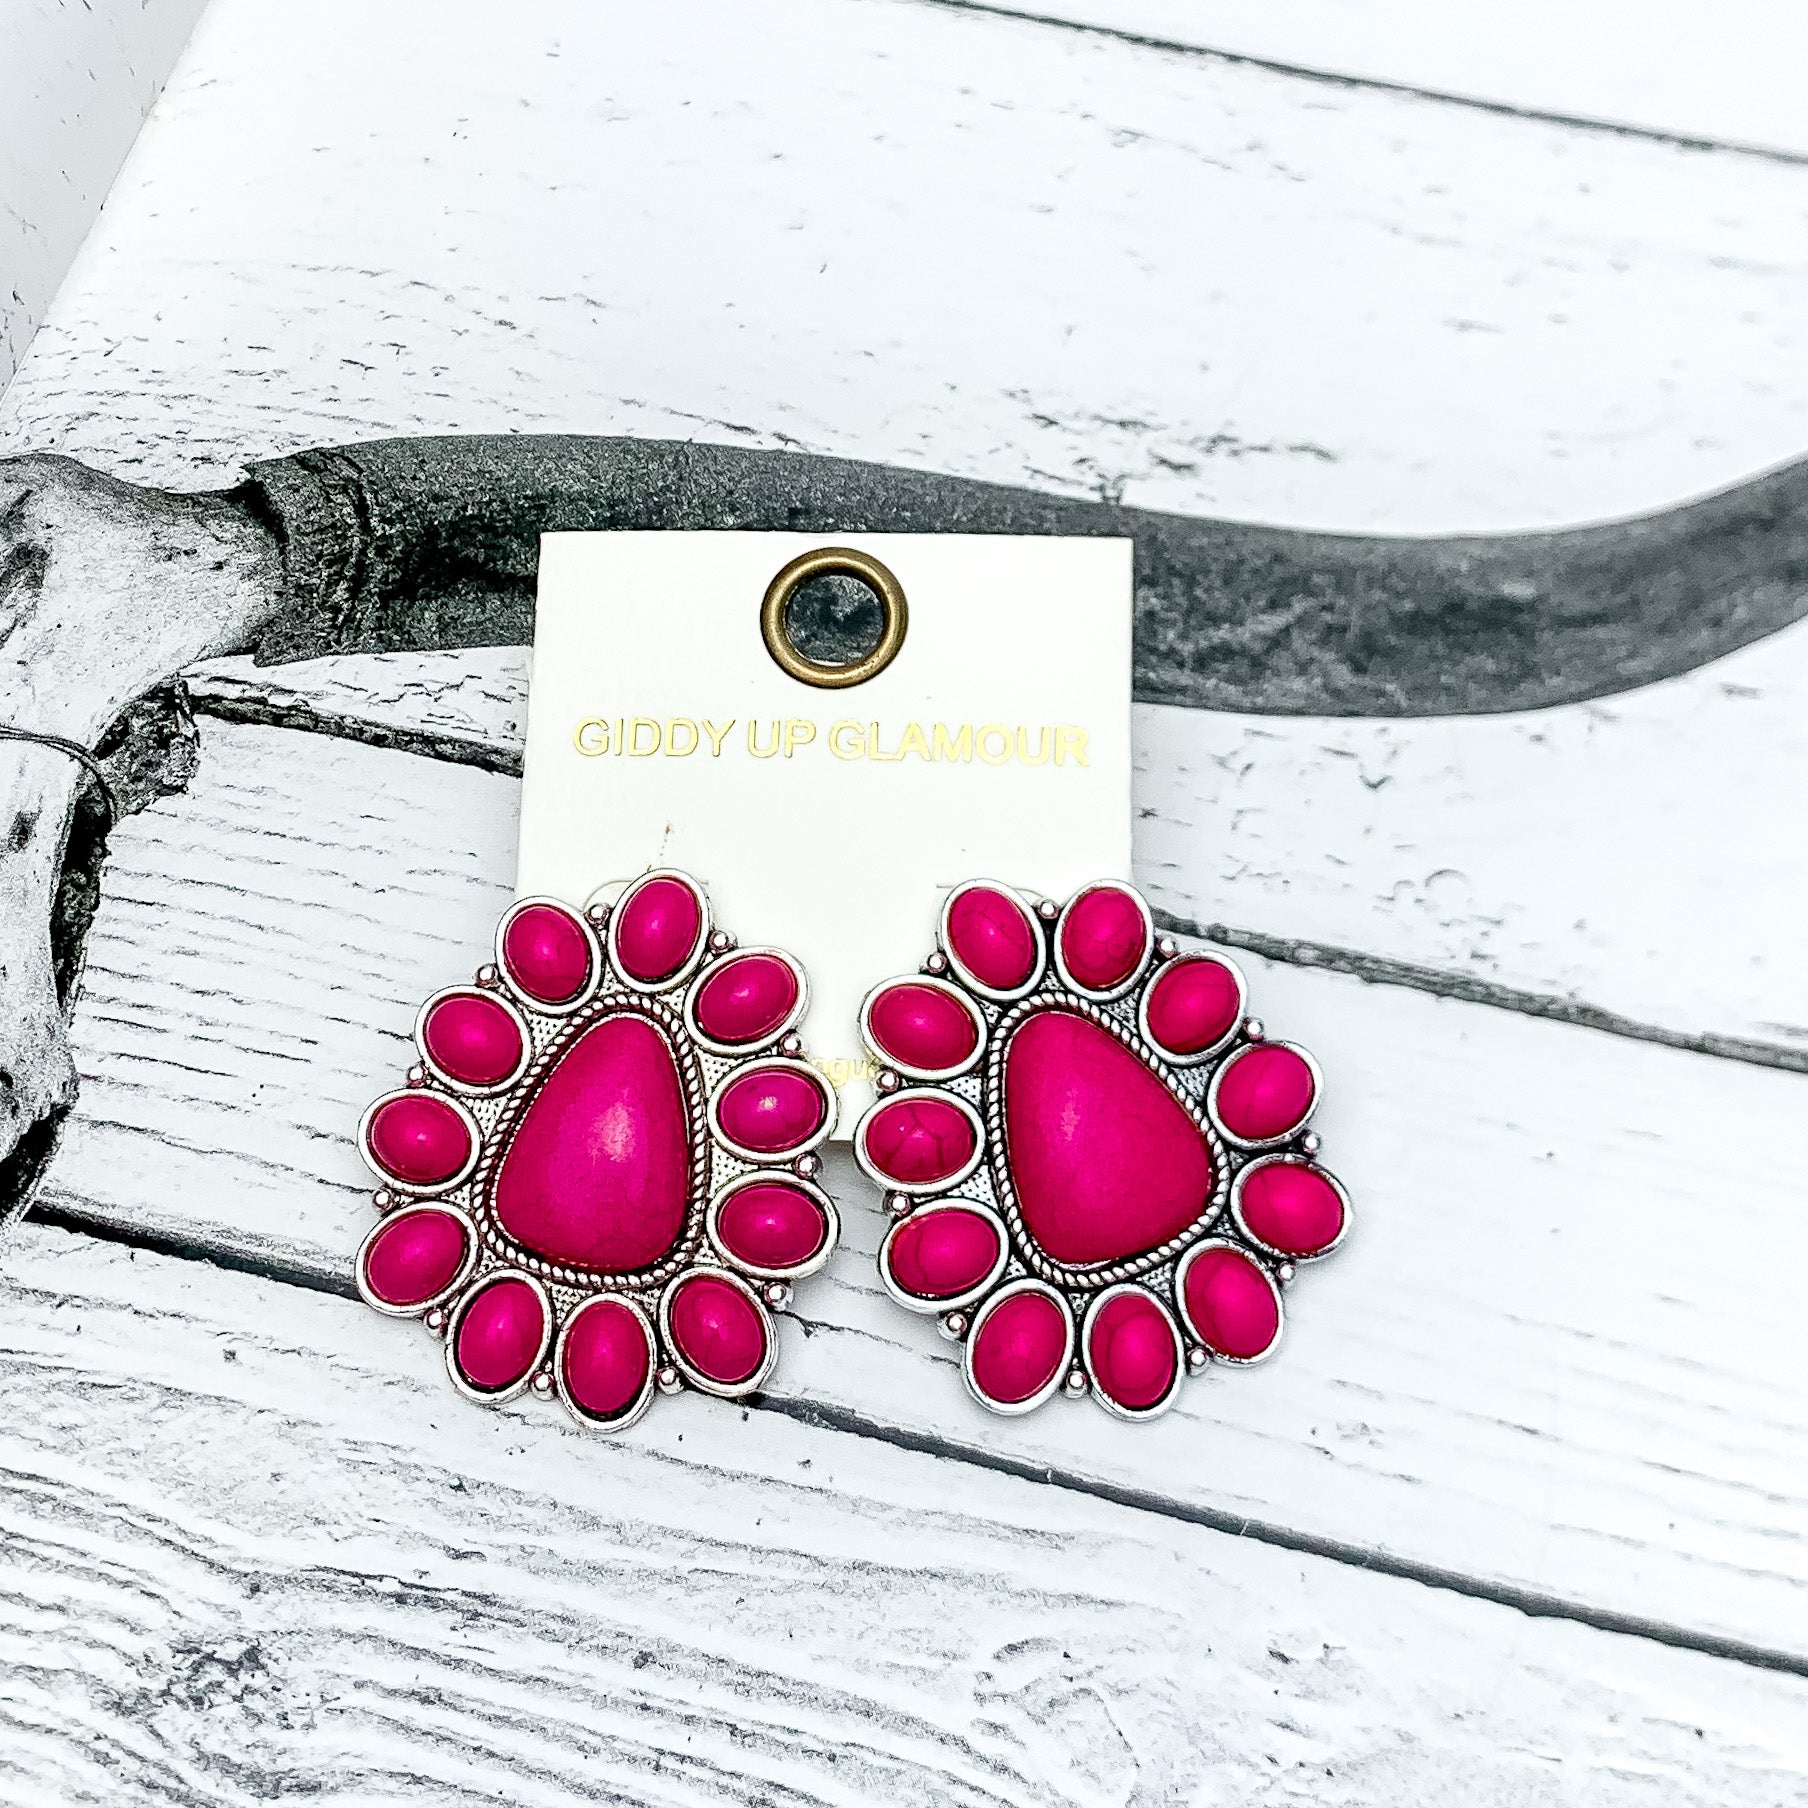 Triangular Cluster Earrings in Hot Pink. The earrings aresilver metal and the stones surround one big stone in the middle. Pictured on a western background.